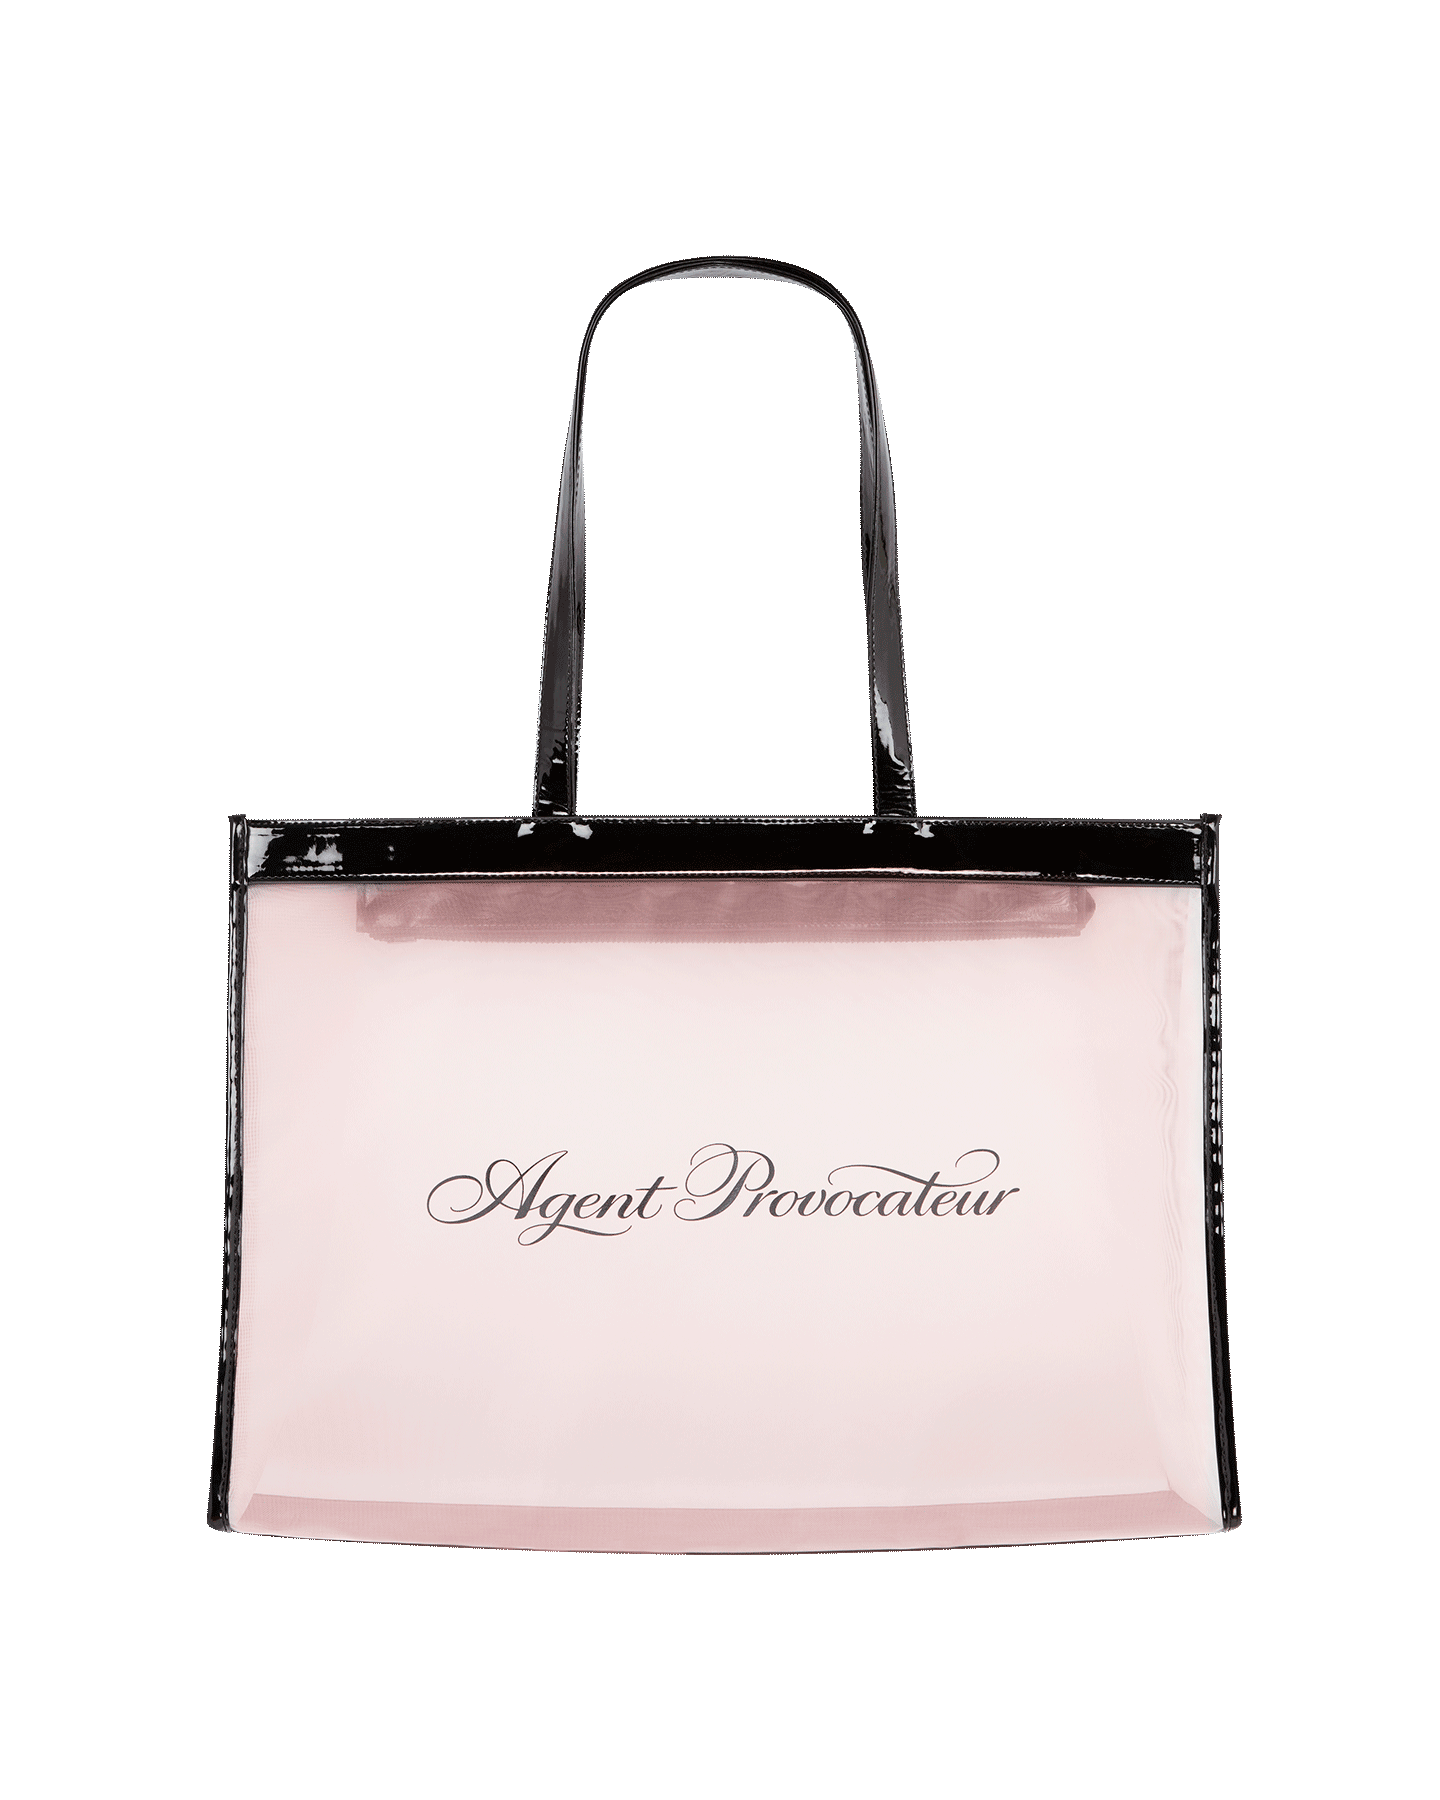 AP Bag Tote Bag | By Agent Provocateur All Accessories